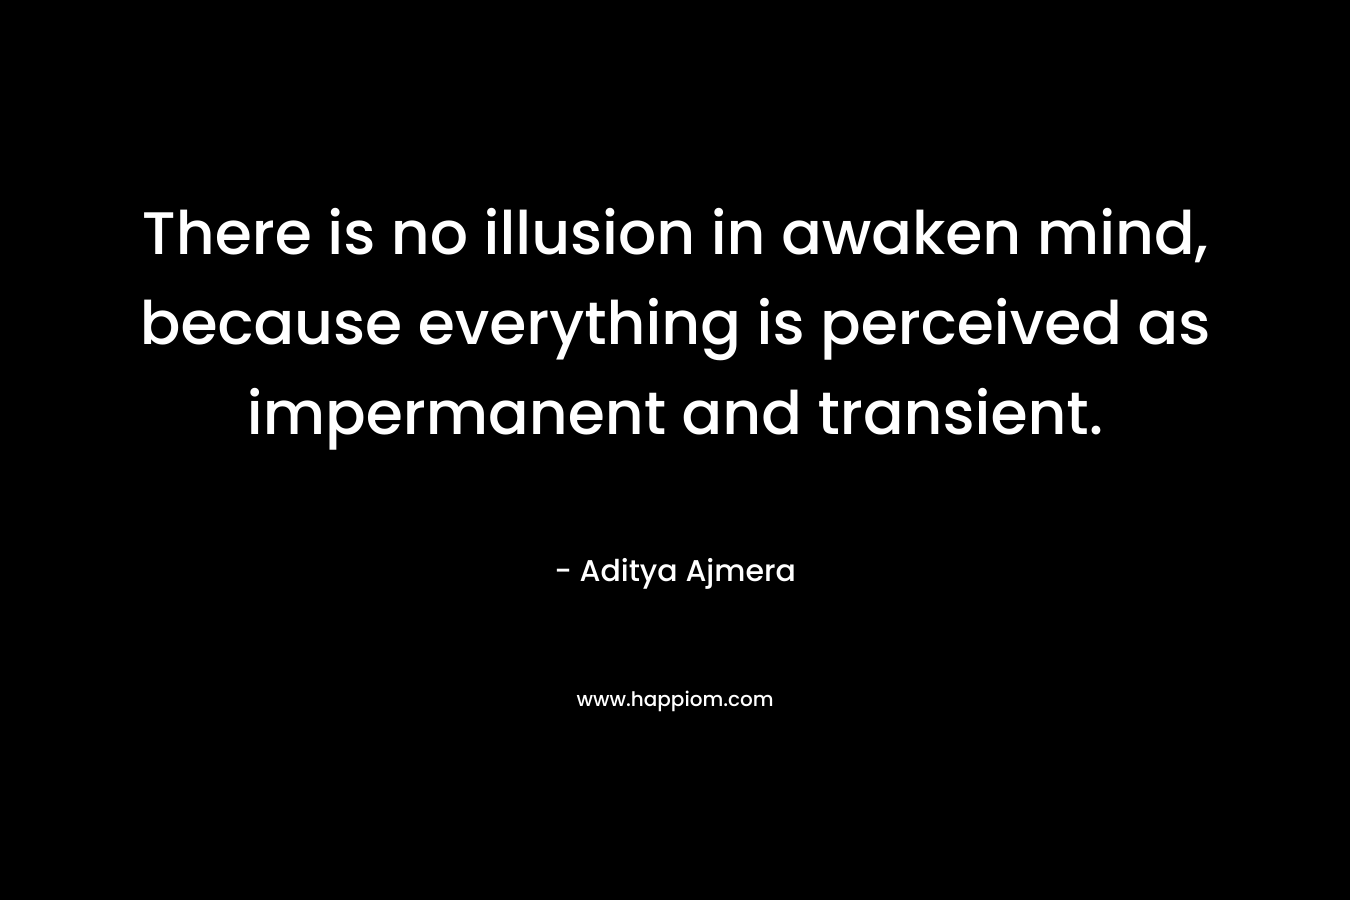 There is no illusion in awaken mind, because everything is perceived as impermanent and transient. – Aditya Ajmera